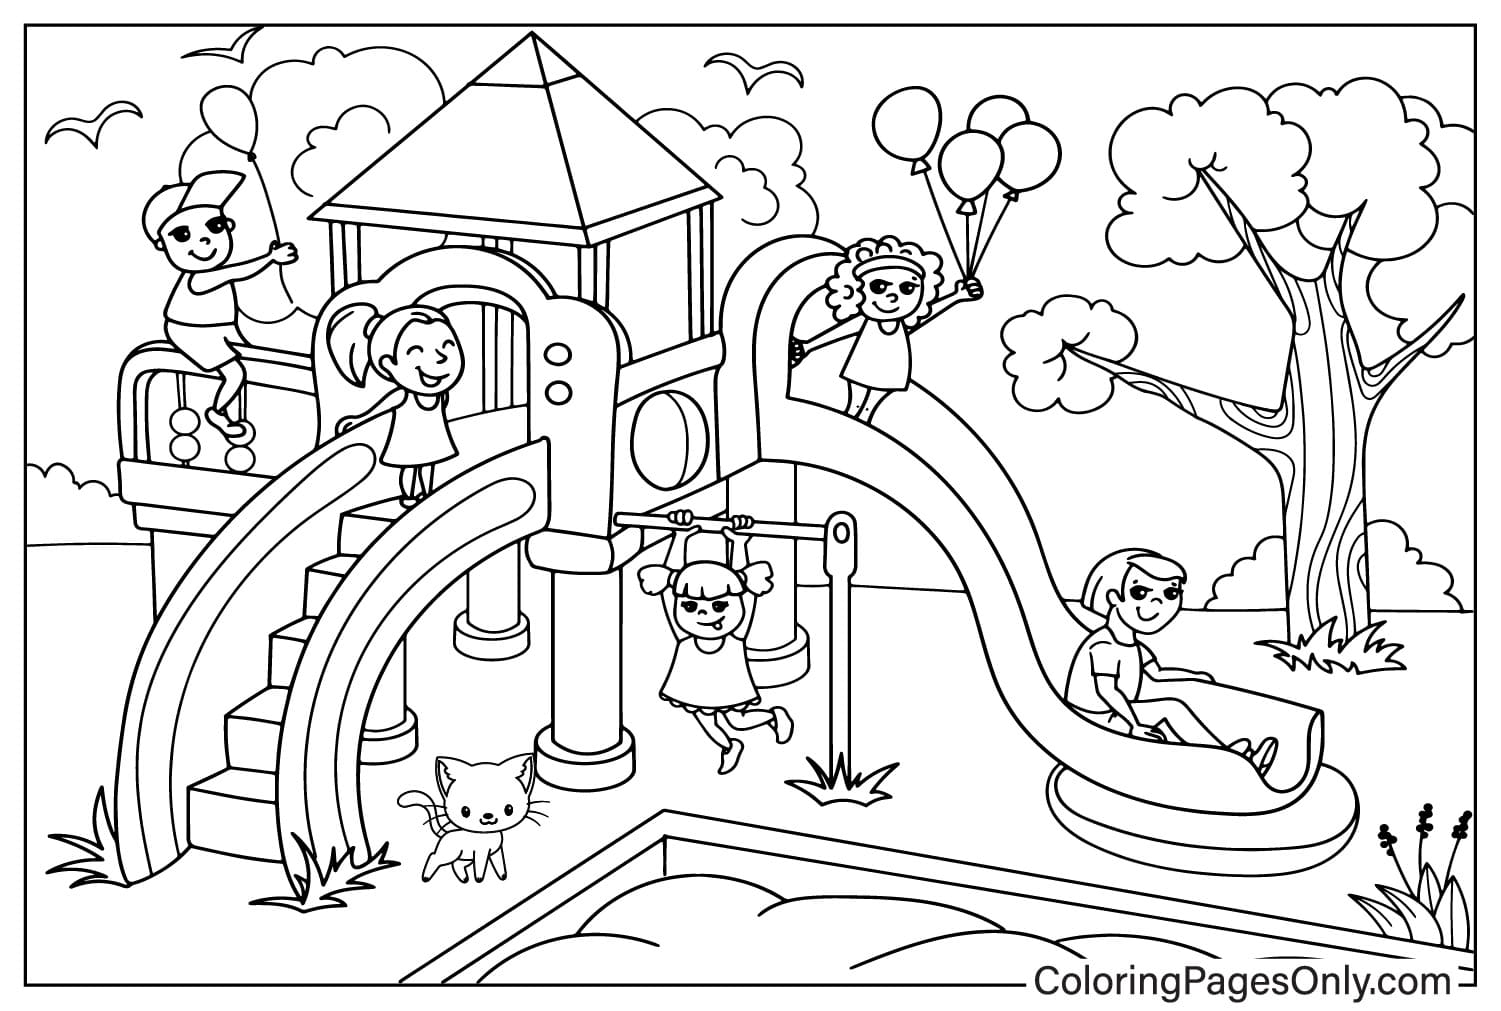 Playground Coloring Sheet for Kids from Playground